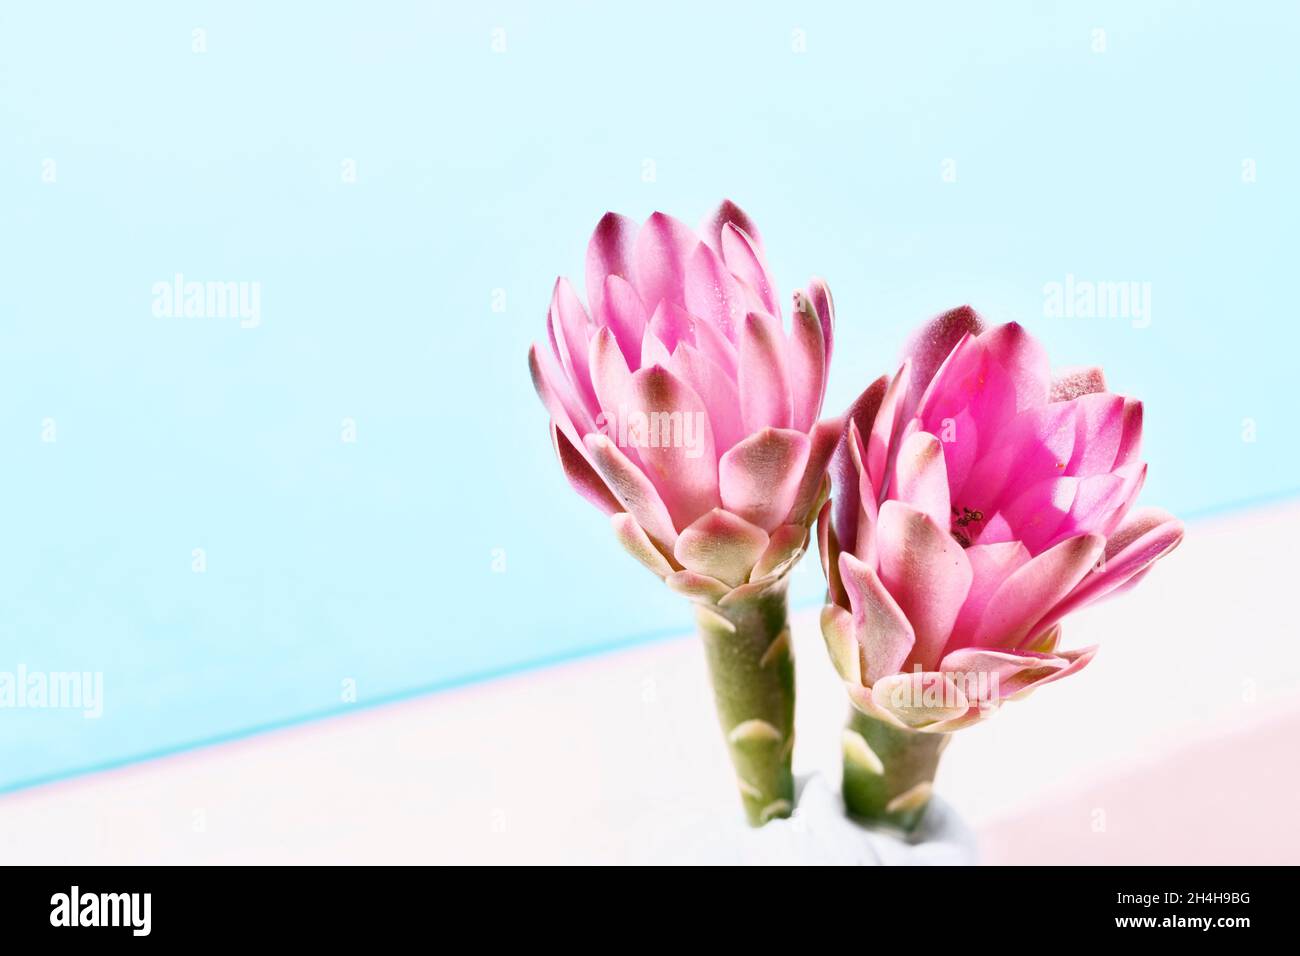 Beautiful  bright pink flowers of gymnocalycium cactus  or chin cactus  on bright colored background Stock Photo